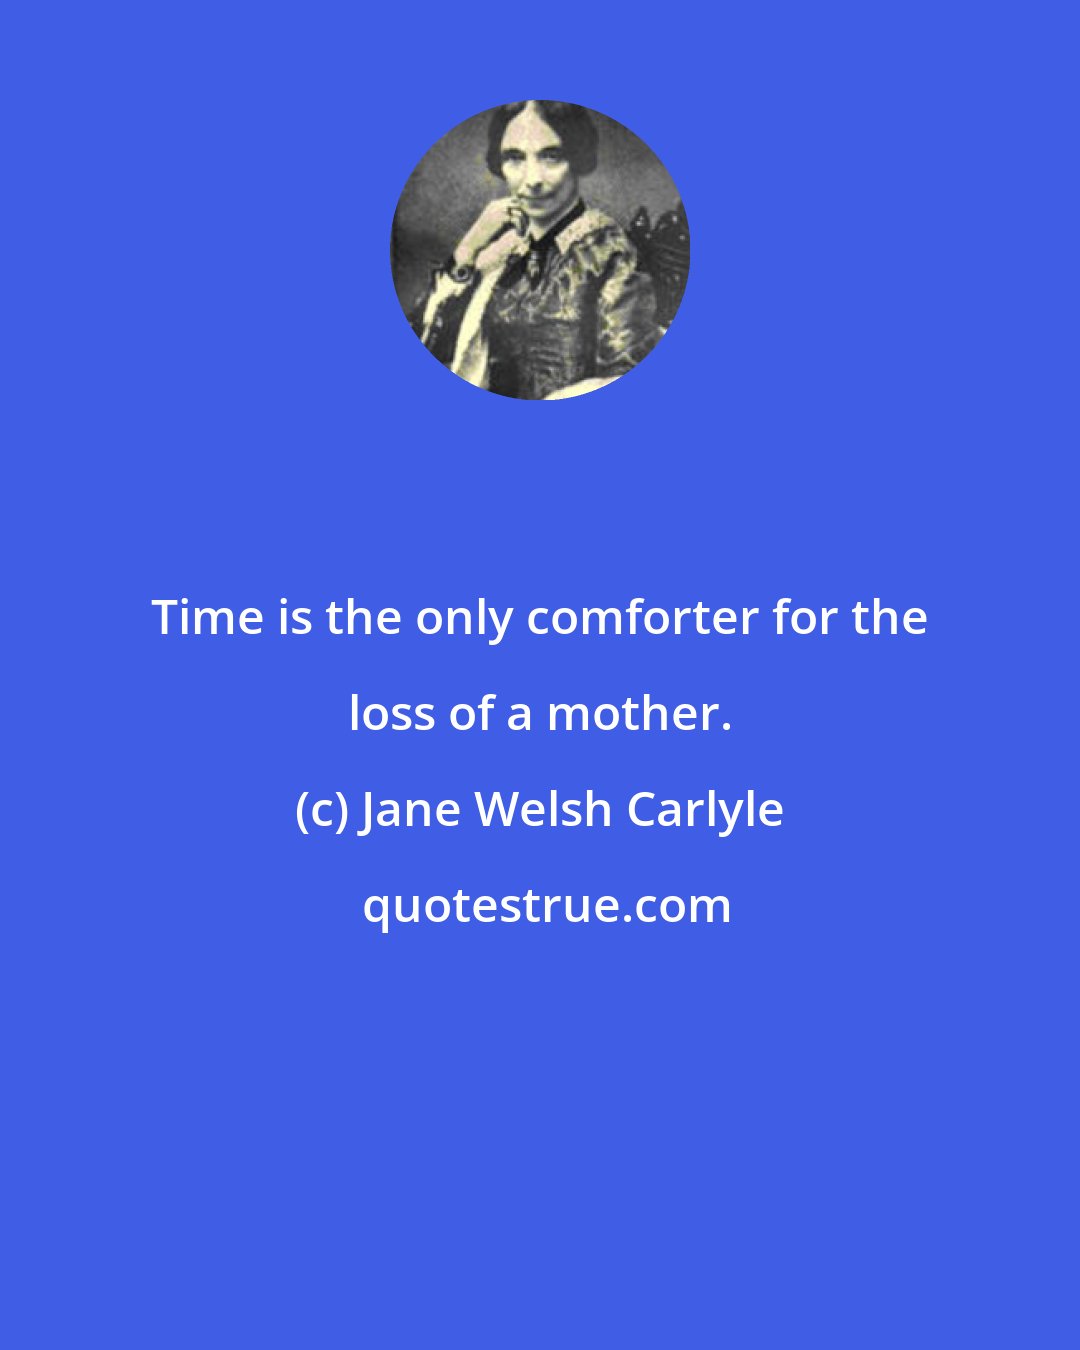 Jane Welsh Carlyle: Time is the only comforter for the loss of a mother.